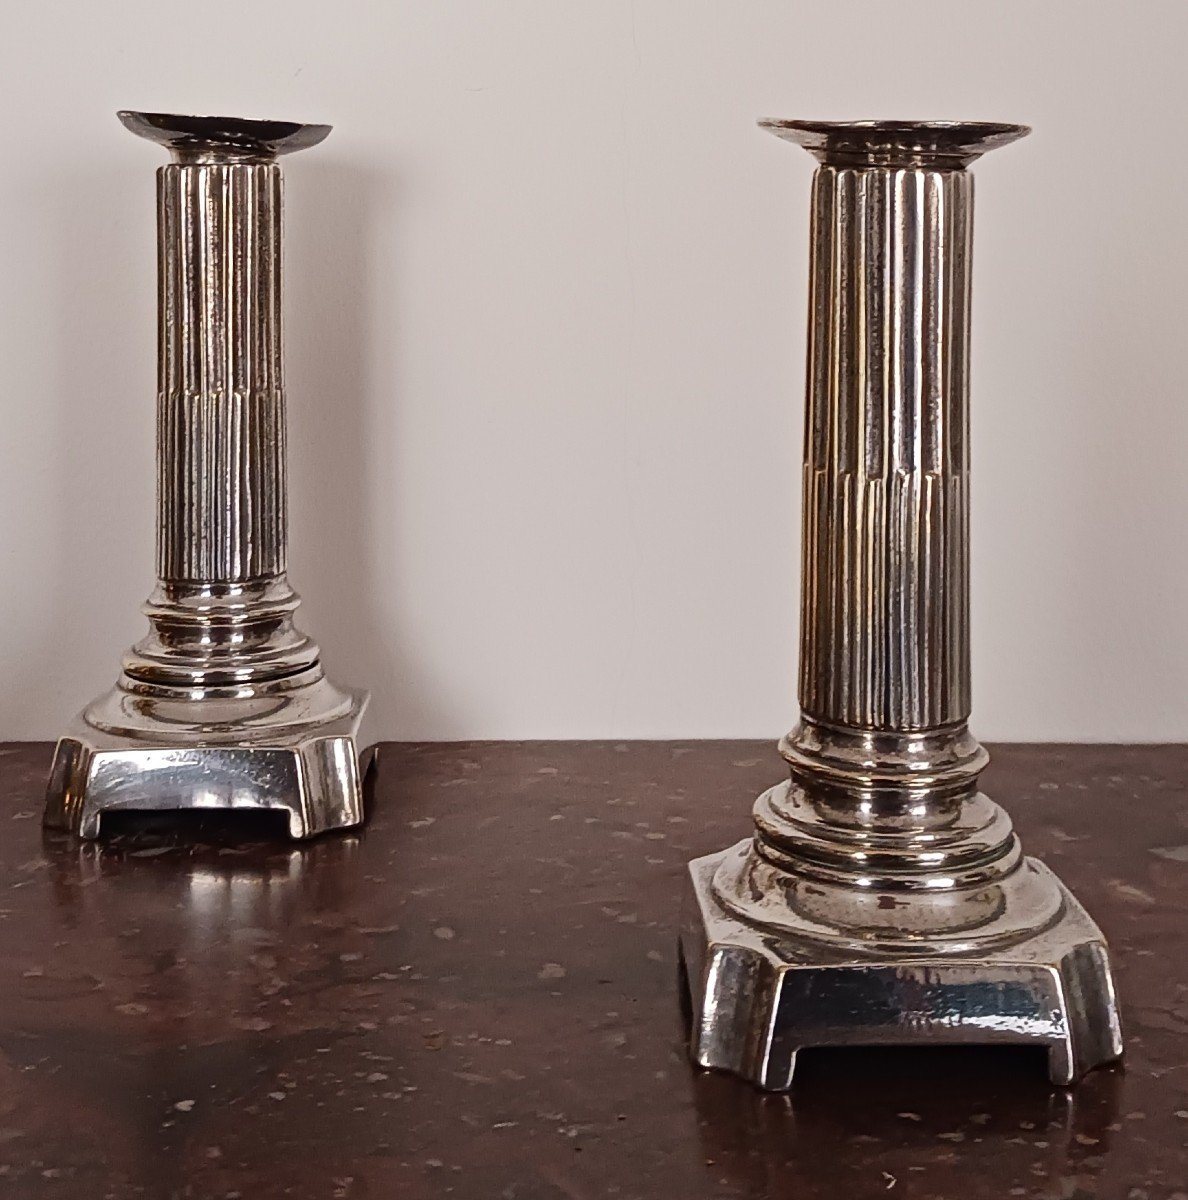 France, Last Third Of The 18th Century - Pair Of Silver-plated Bronze Candlesticks Or Torches - Louis XVI Period